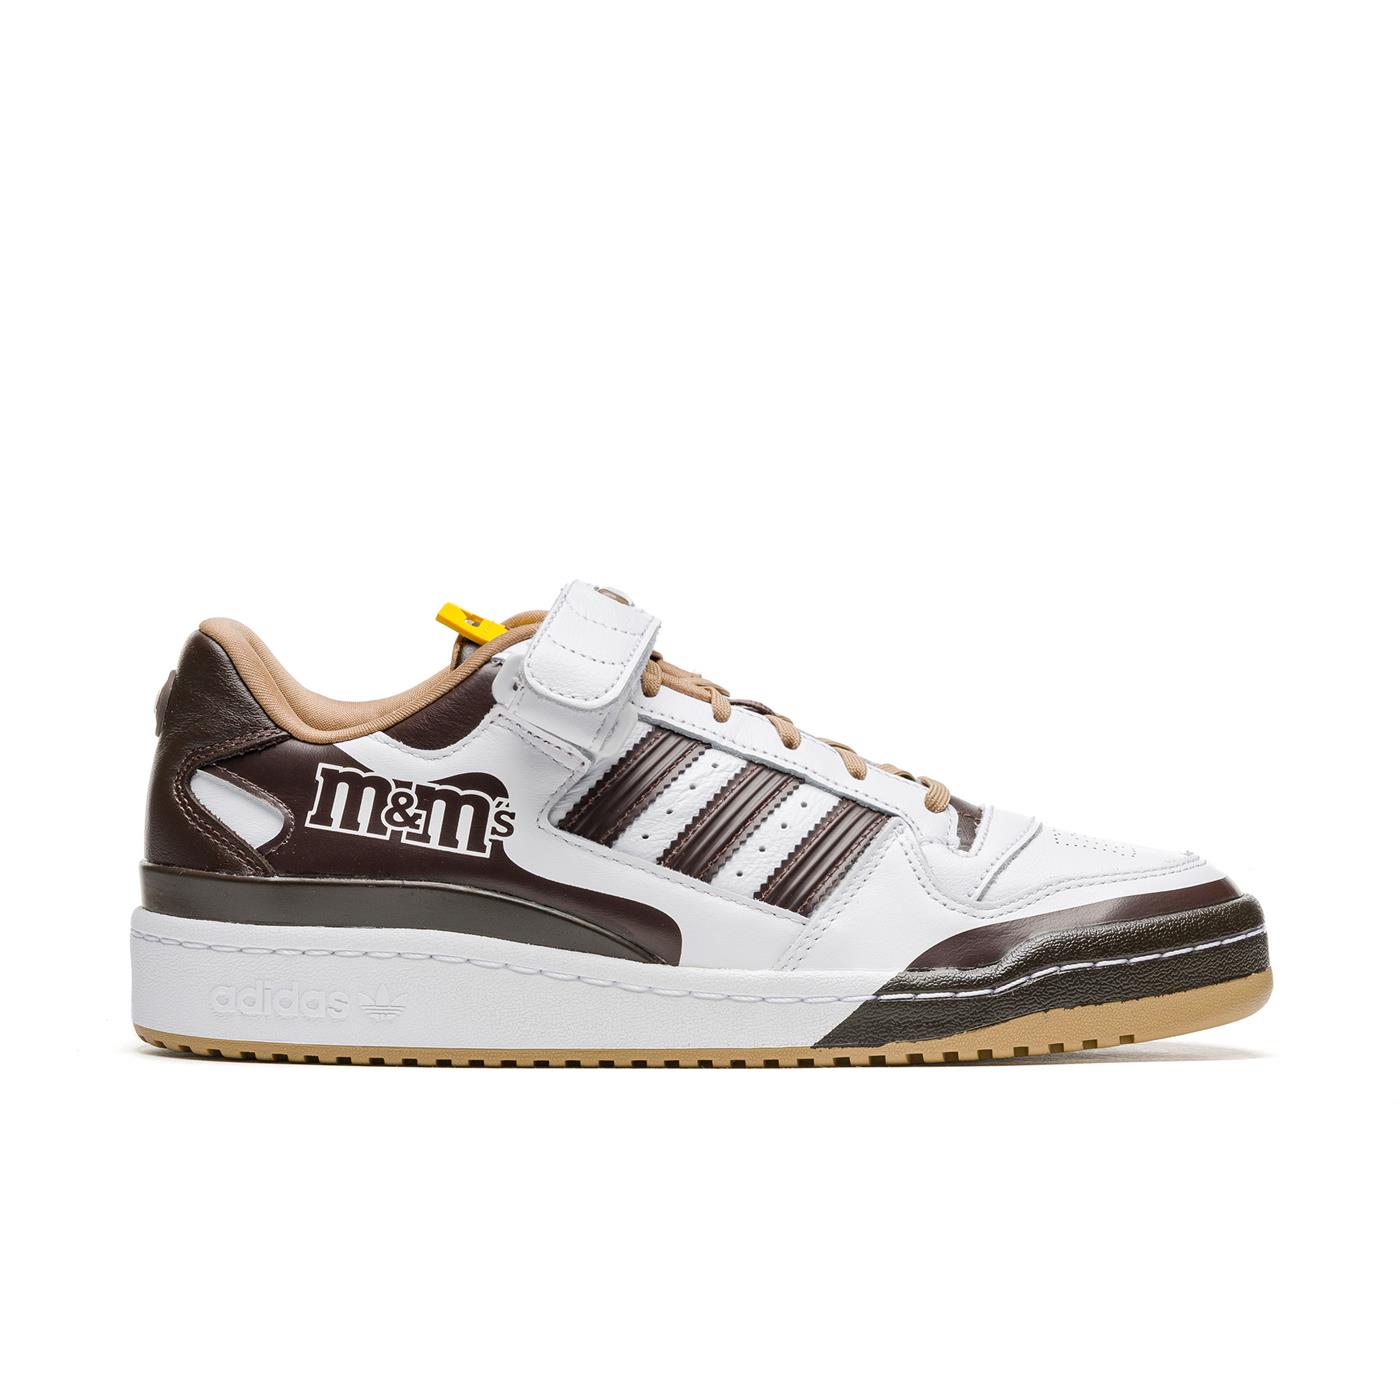 adidas superstar gold iridescent shoes sale ArvindShops | | Sneakers ADIDAS M&Ms Low 84 Brown for Man